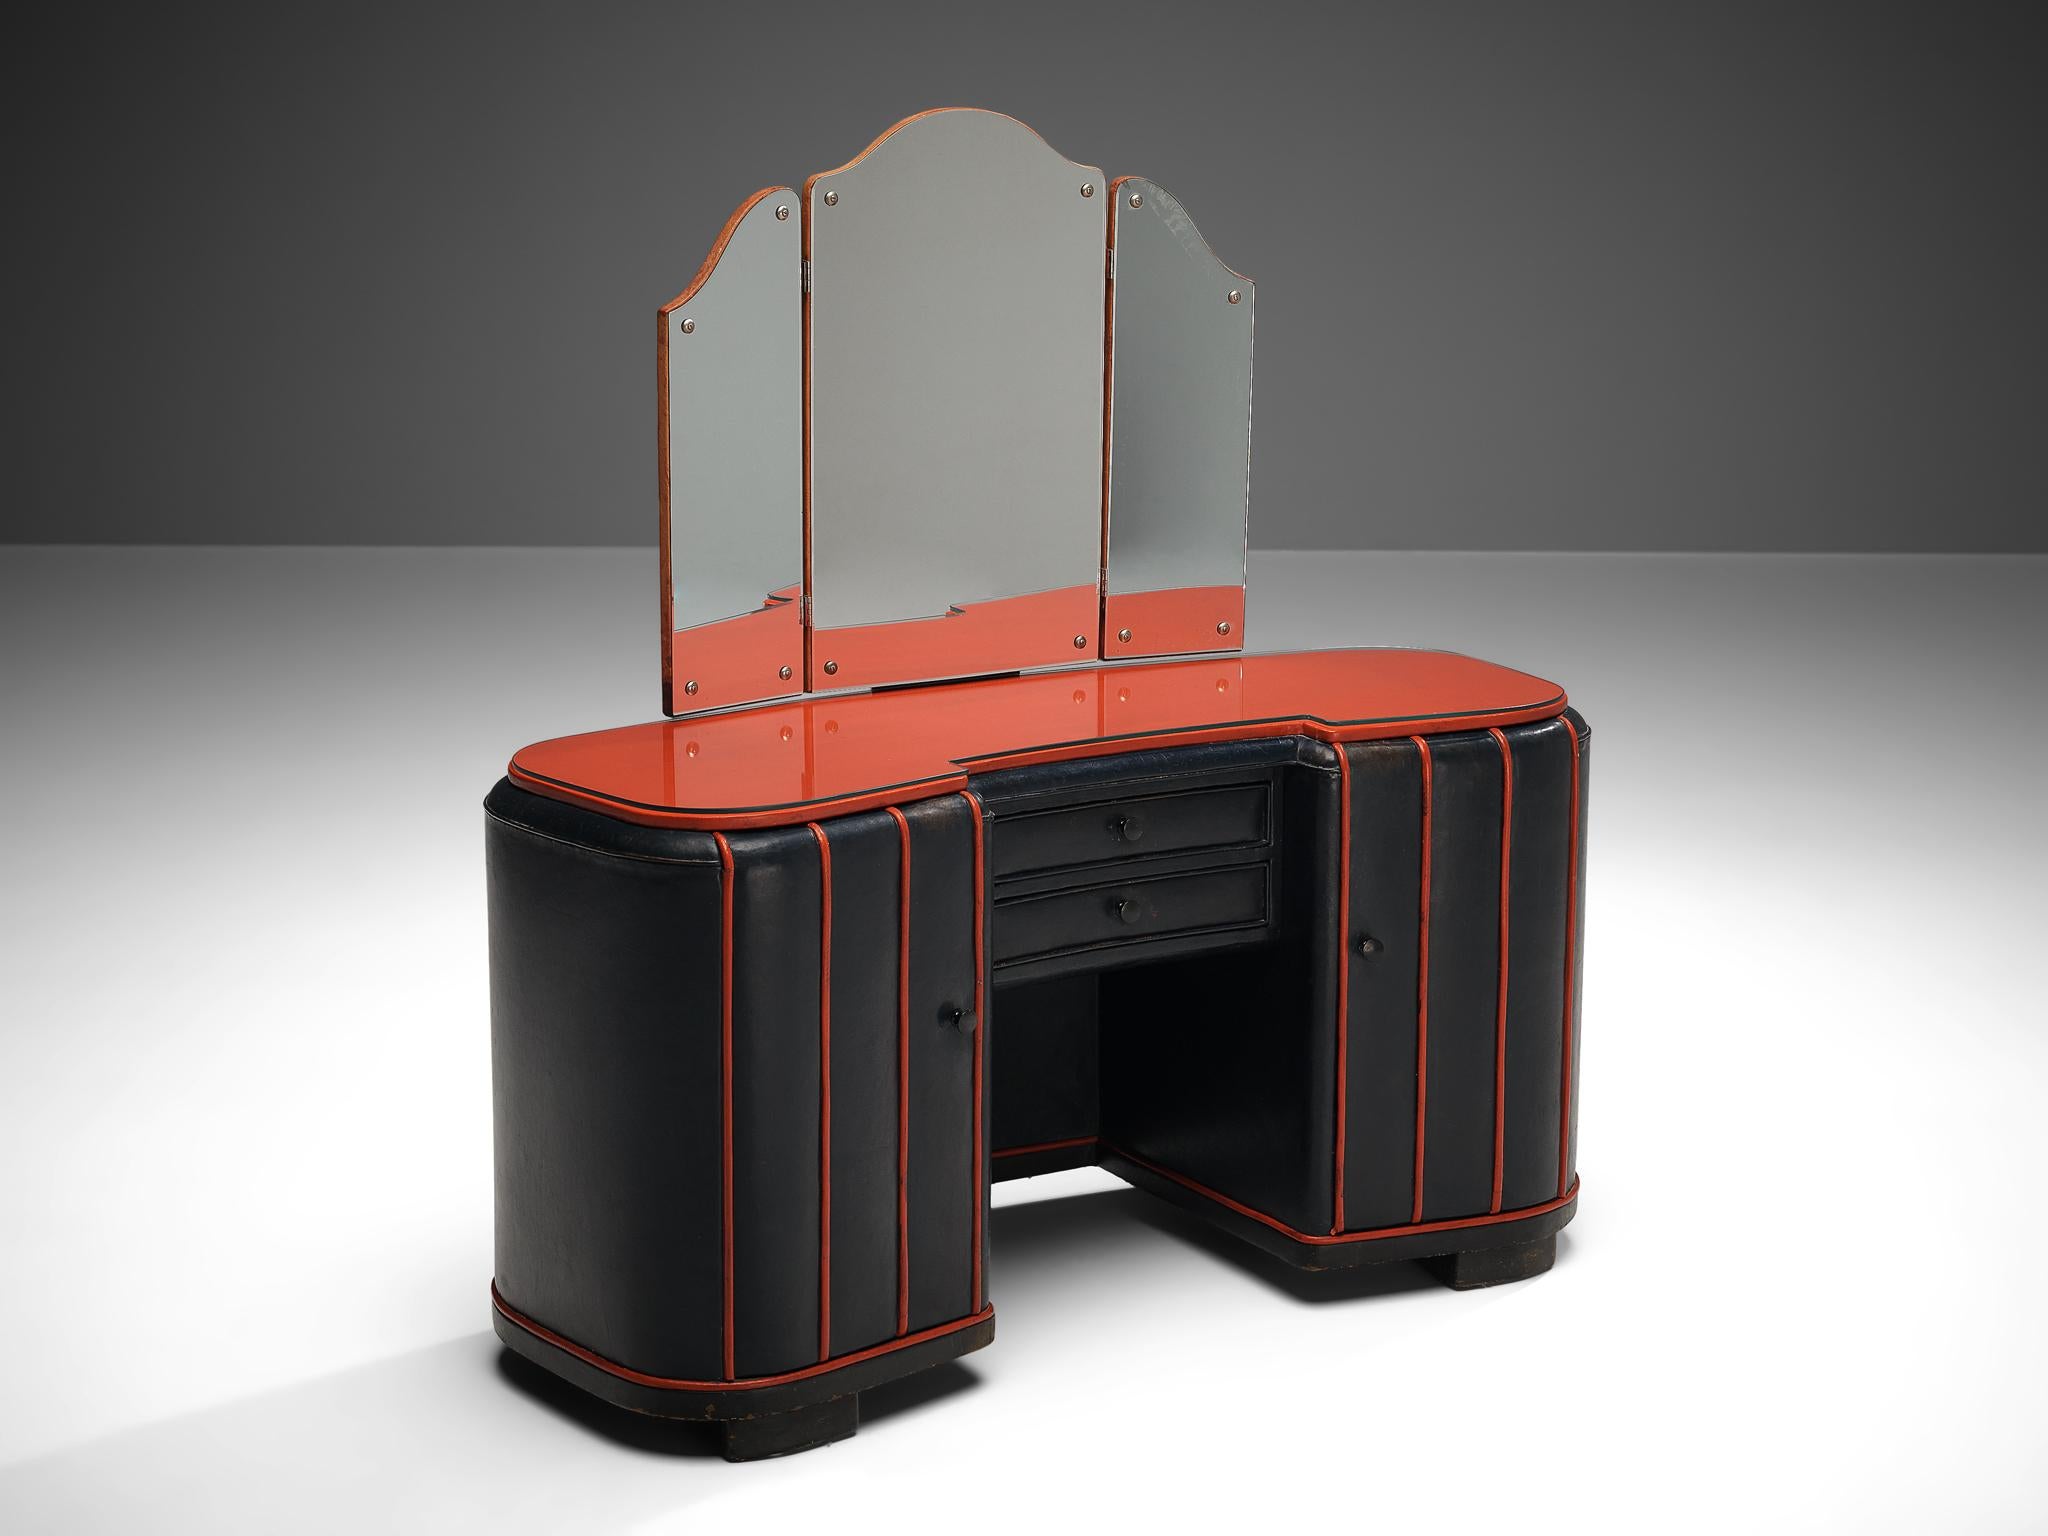 Dressing table, leather, glass, wood, Denmark, 1940s.

With a dark blue leather surface with red lines this dressing table has a rare texture and appearance. The front with two storage compartments and drawers in the center is topped with glass on a